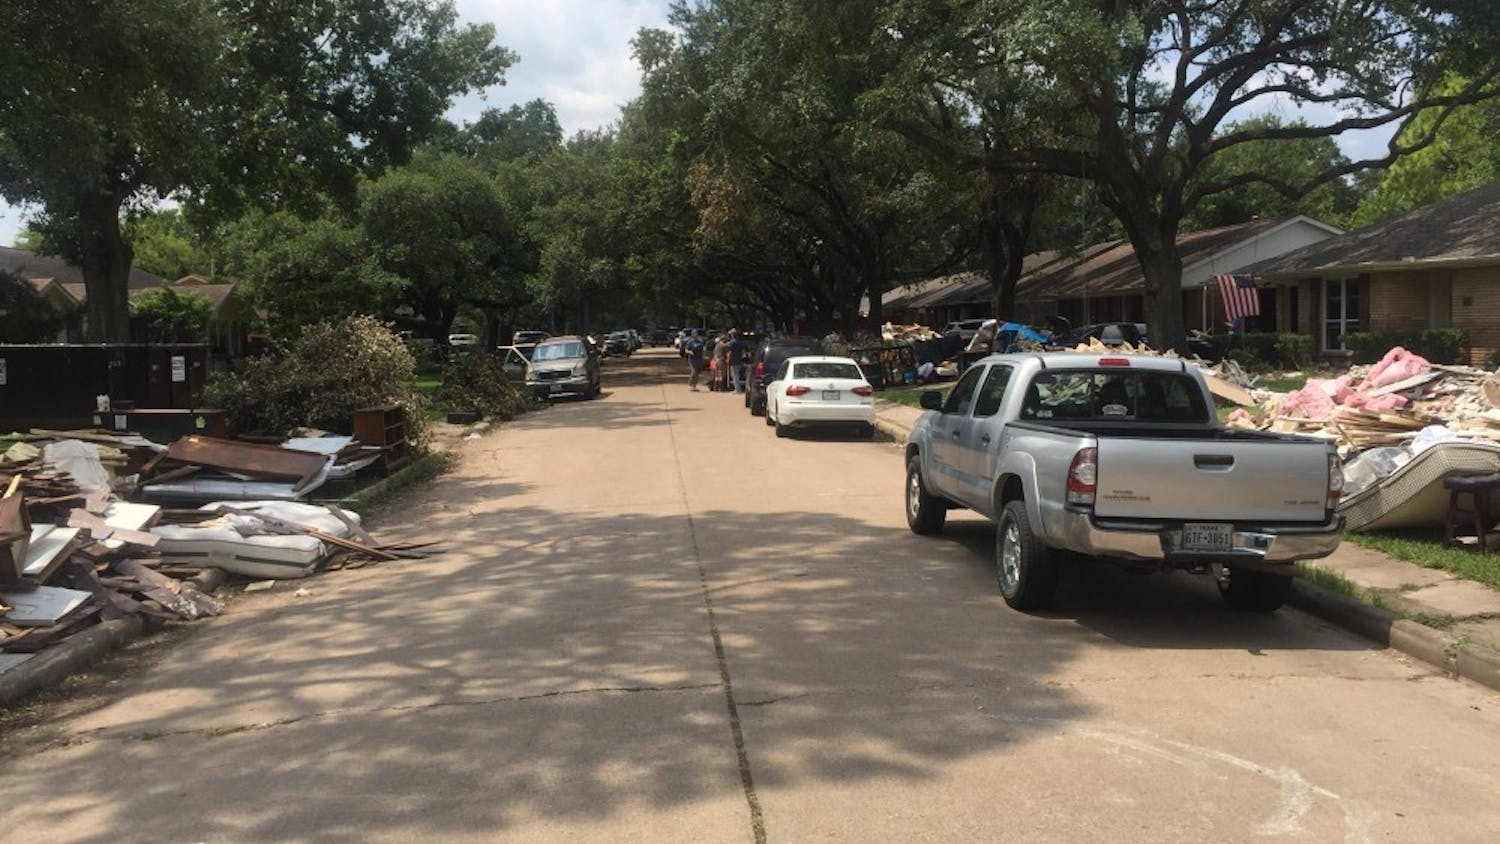 A residential street in Houston, TX during the cleanup process after Hurricane Harvey. Photo courtesy of &nbsp;Valerie Mueller.